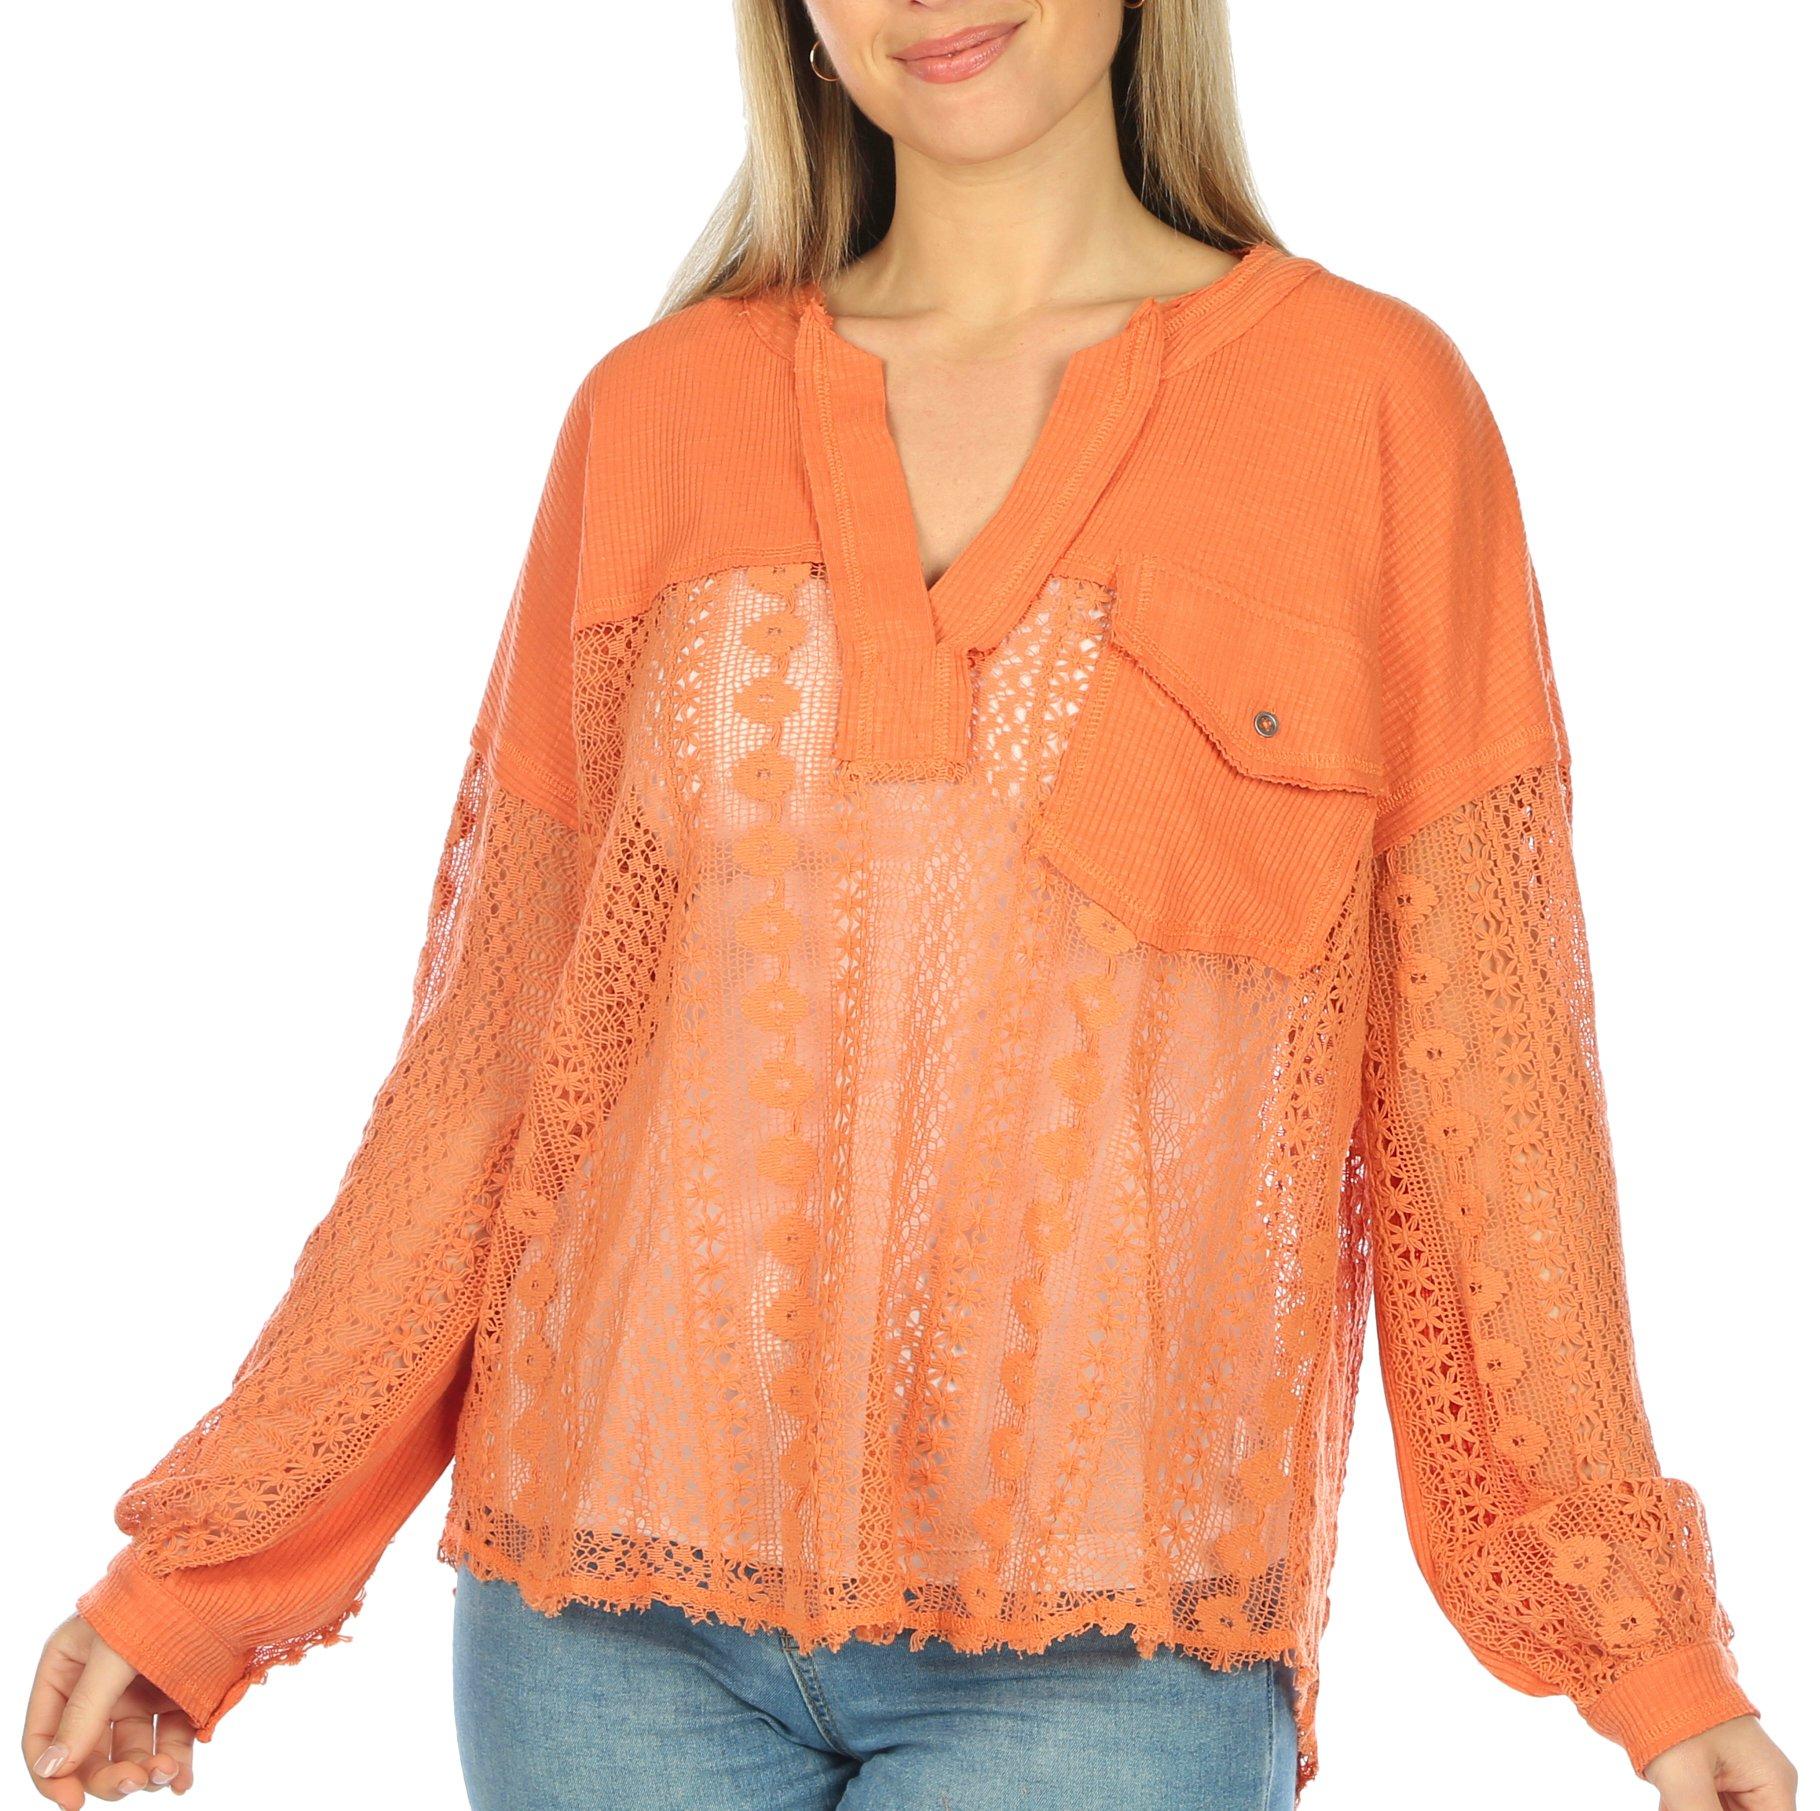 Bunulu Womens Floral Ruffles and Lace Top